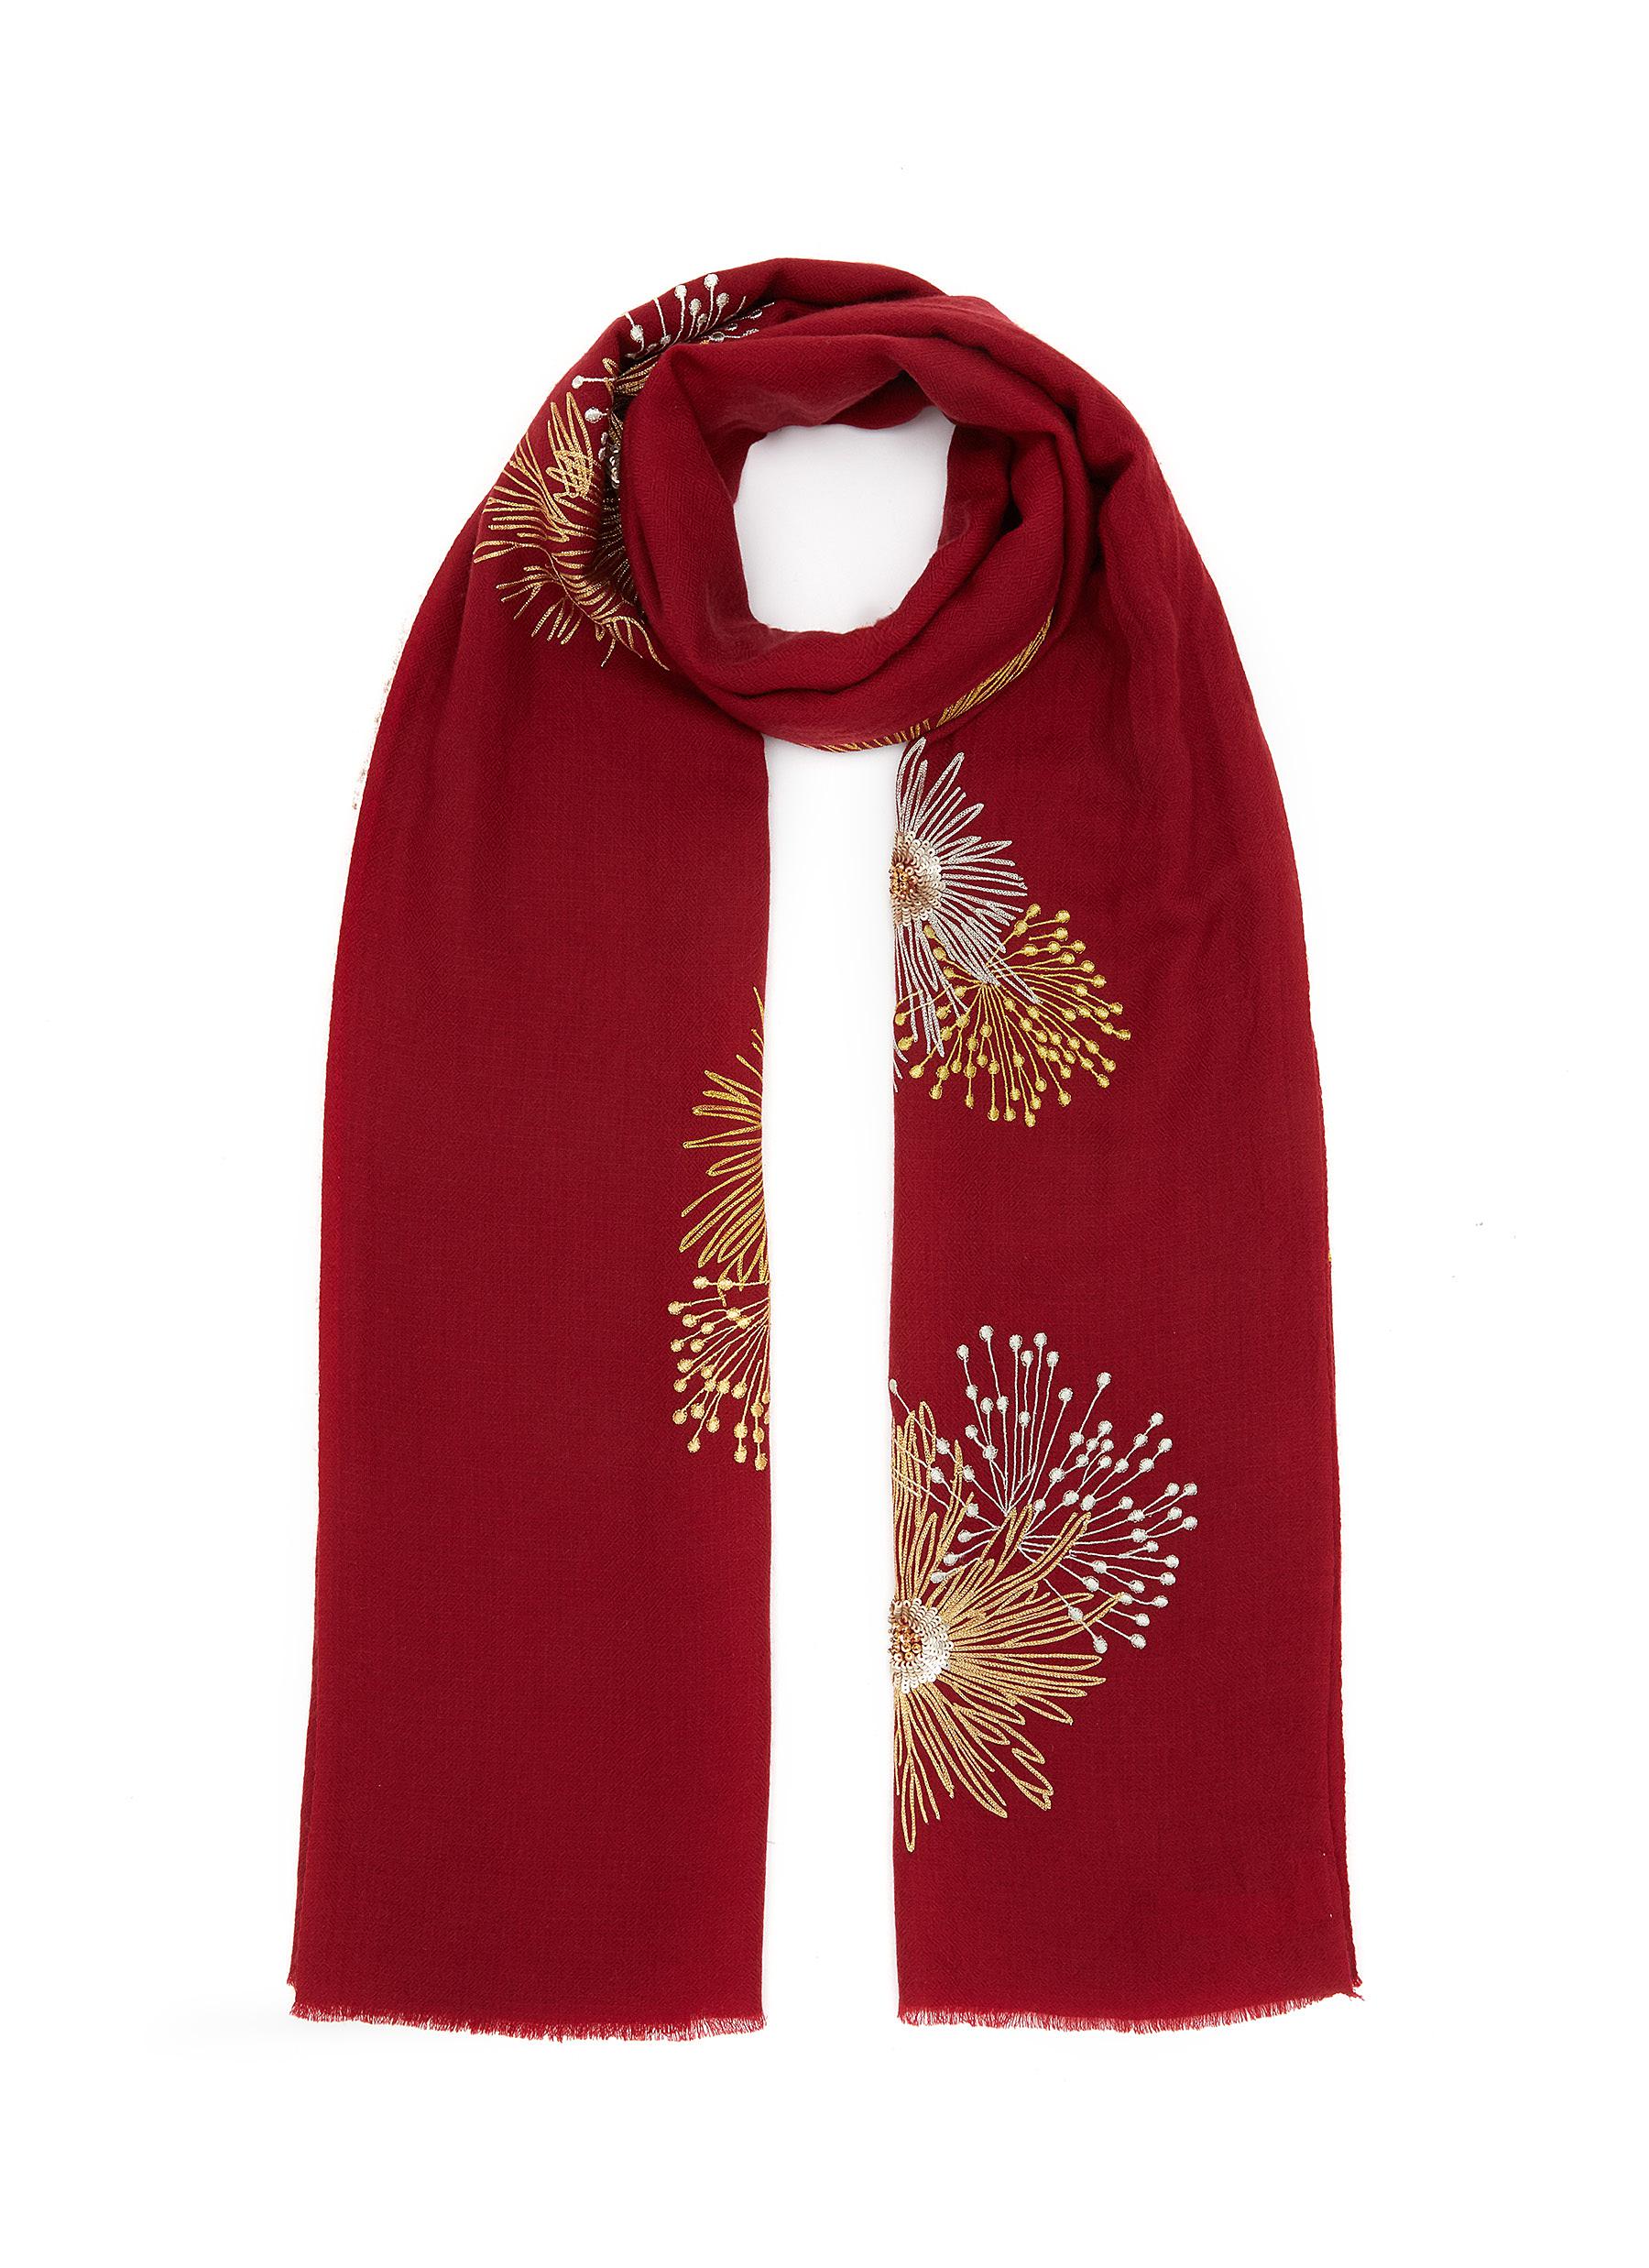 Twinkling Embroidered Merino Wool Scarf